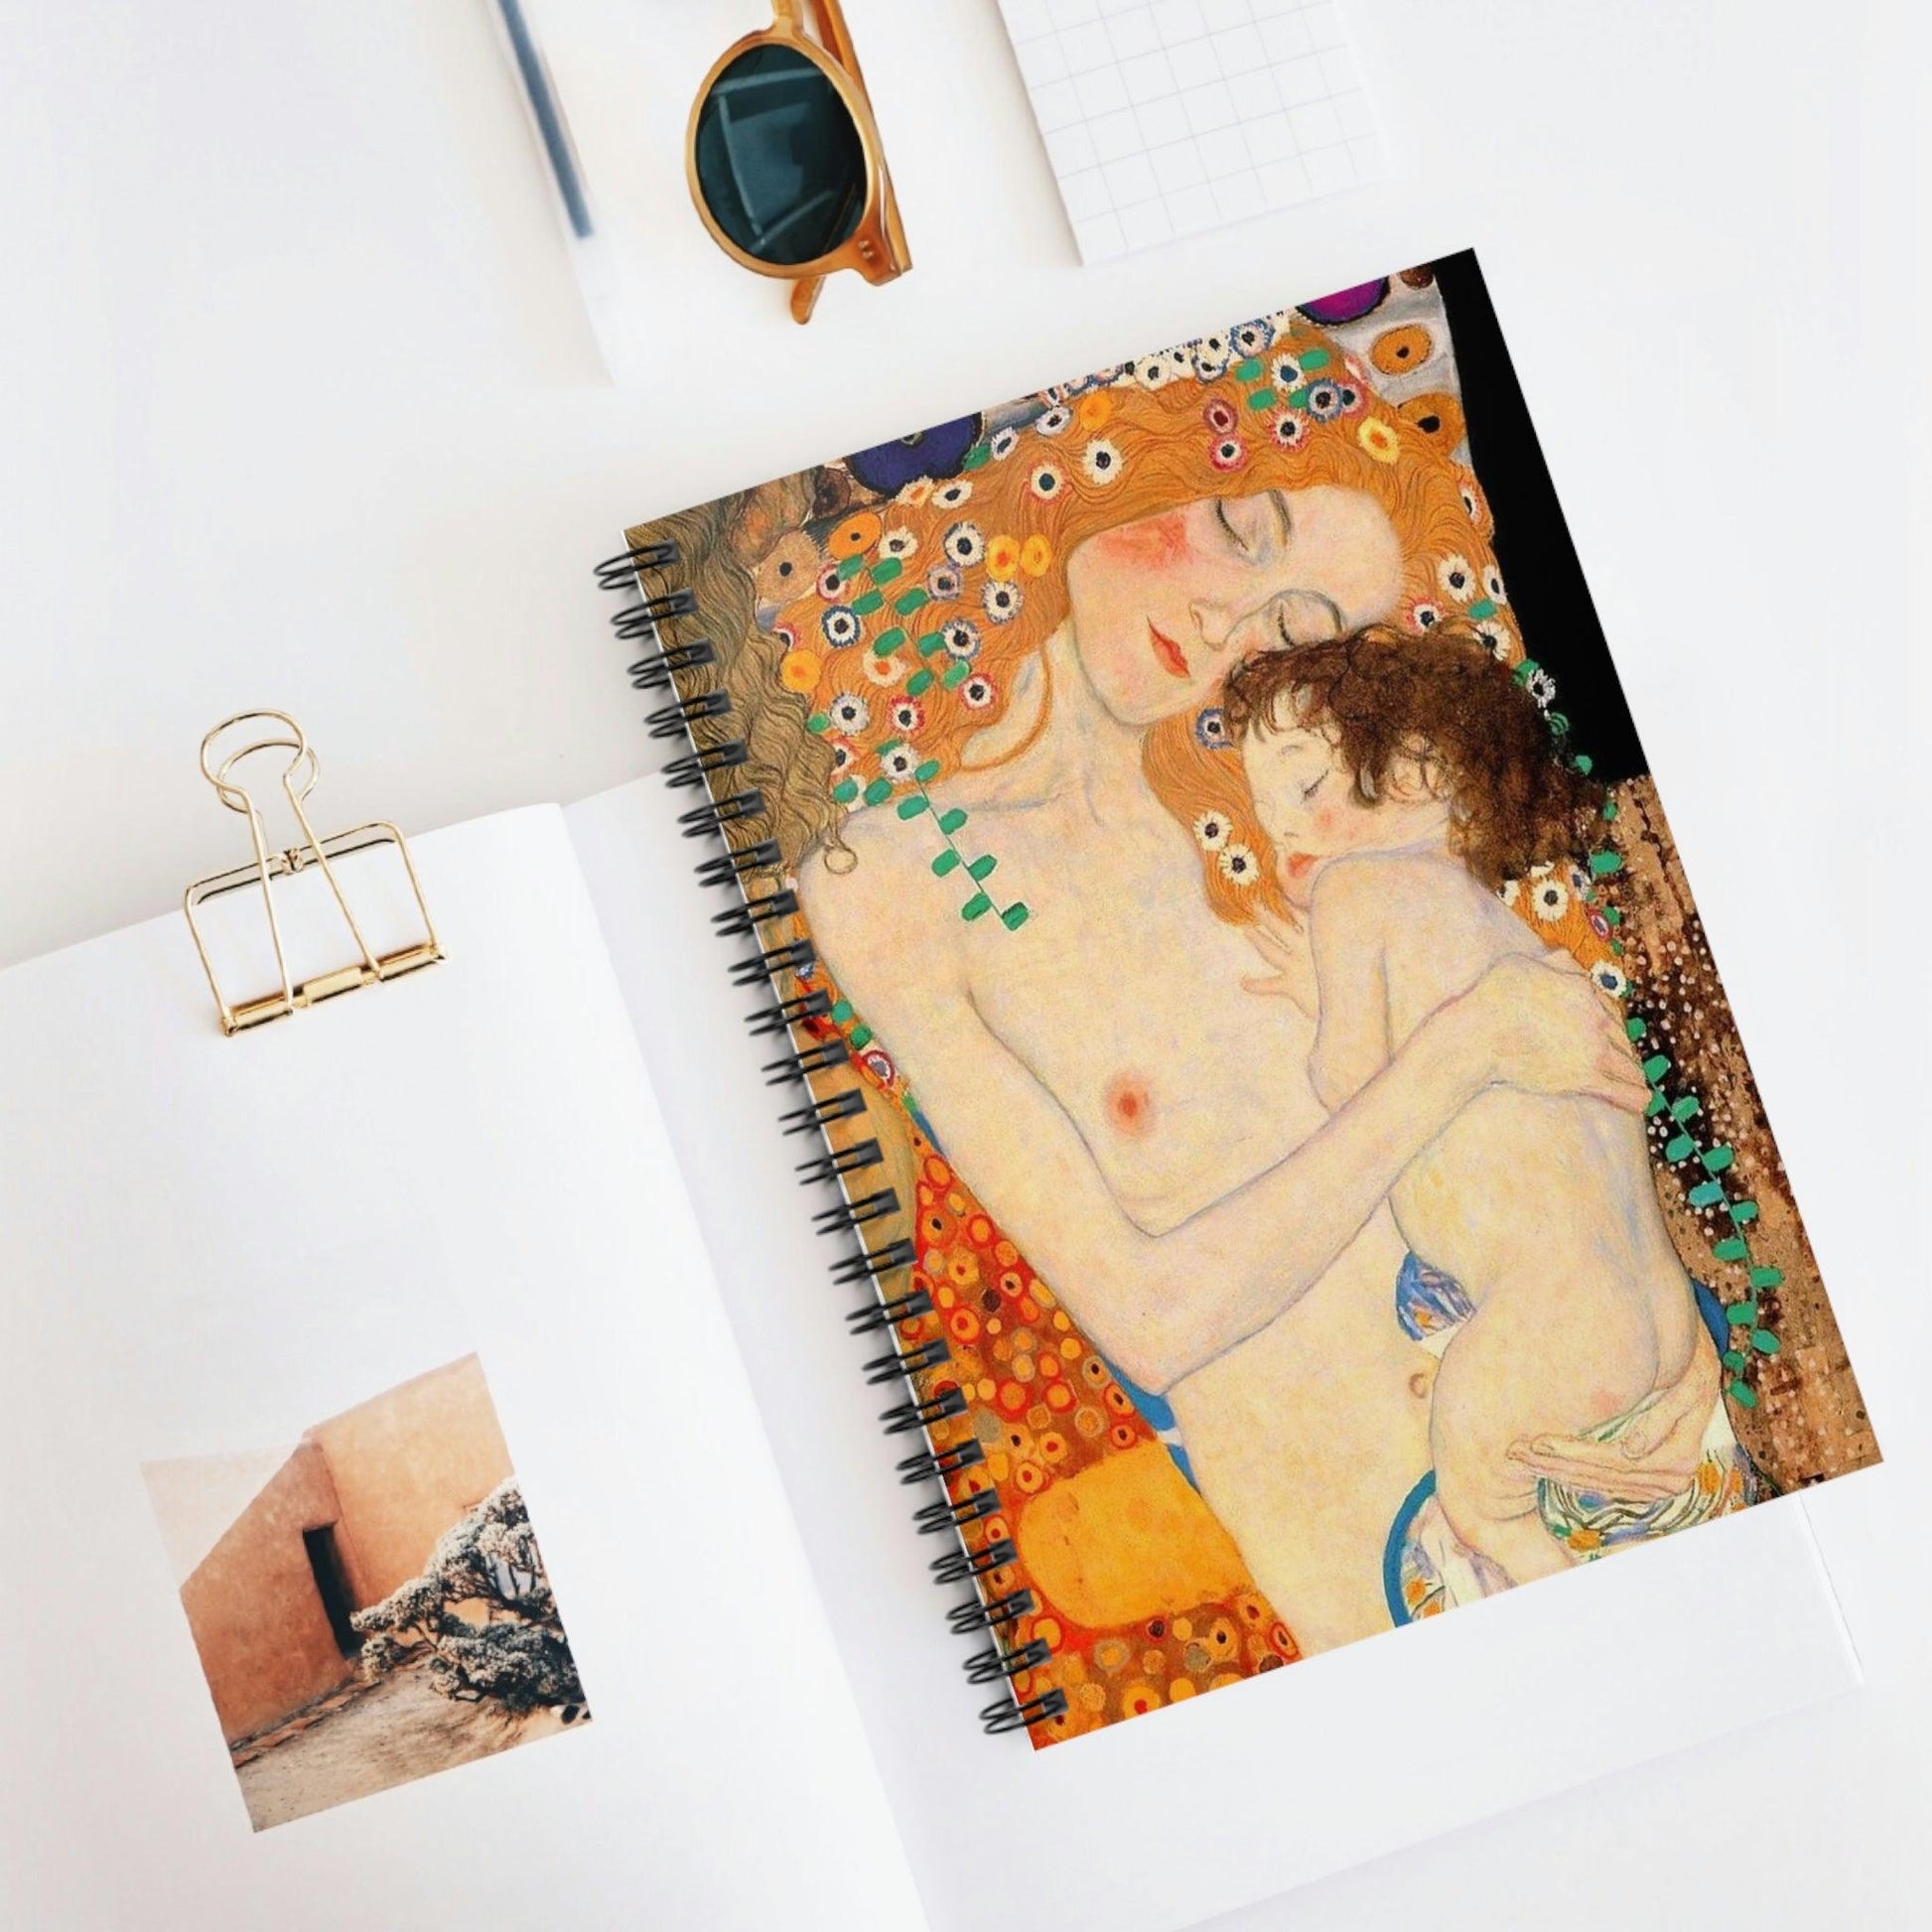 Ages of Woman - Gustov Klimt - Masters in Art